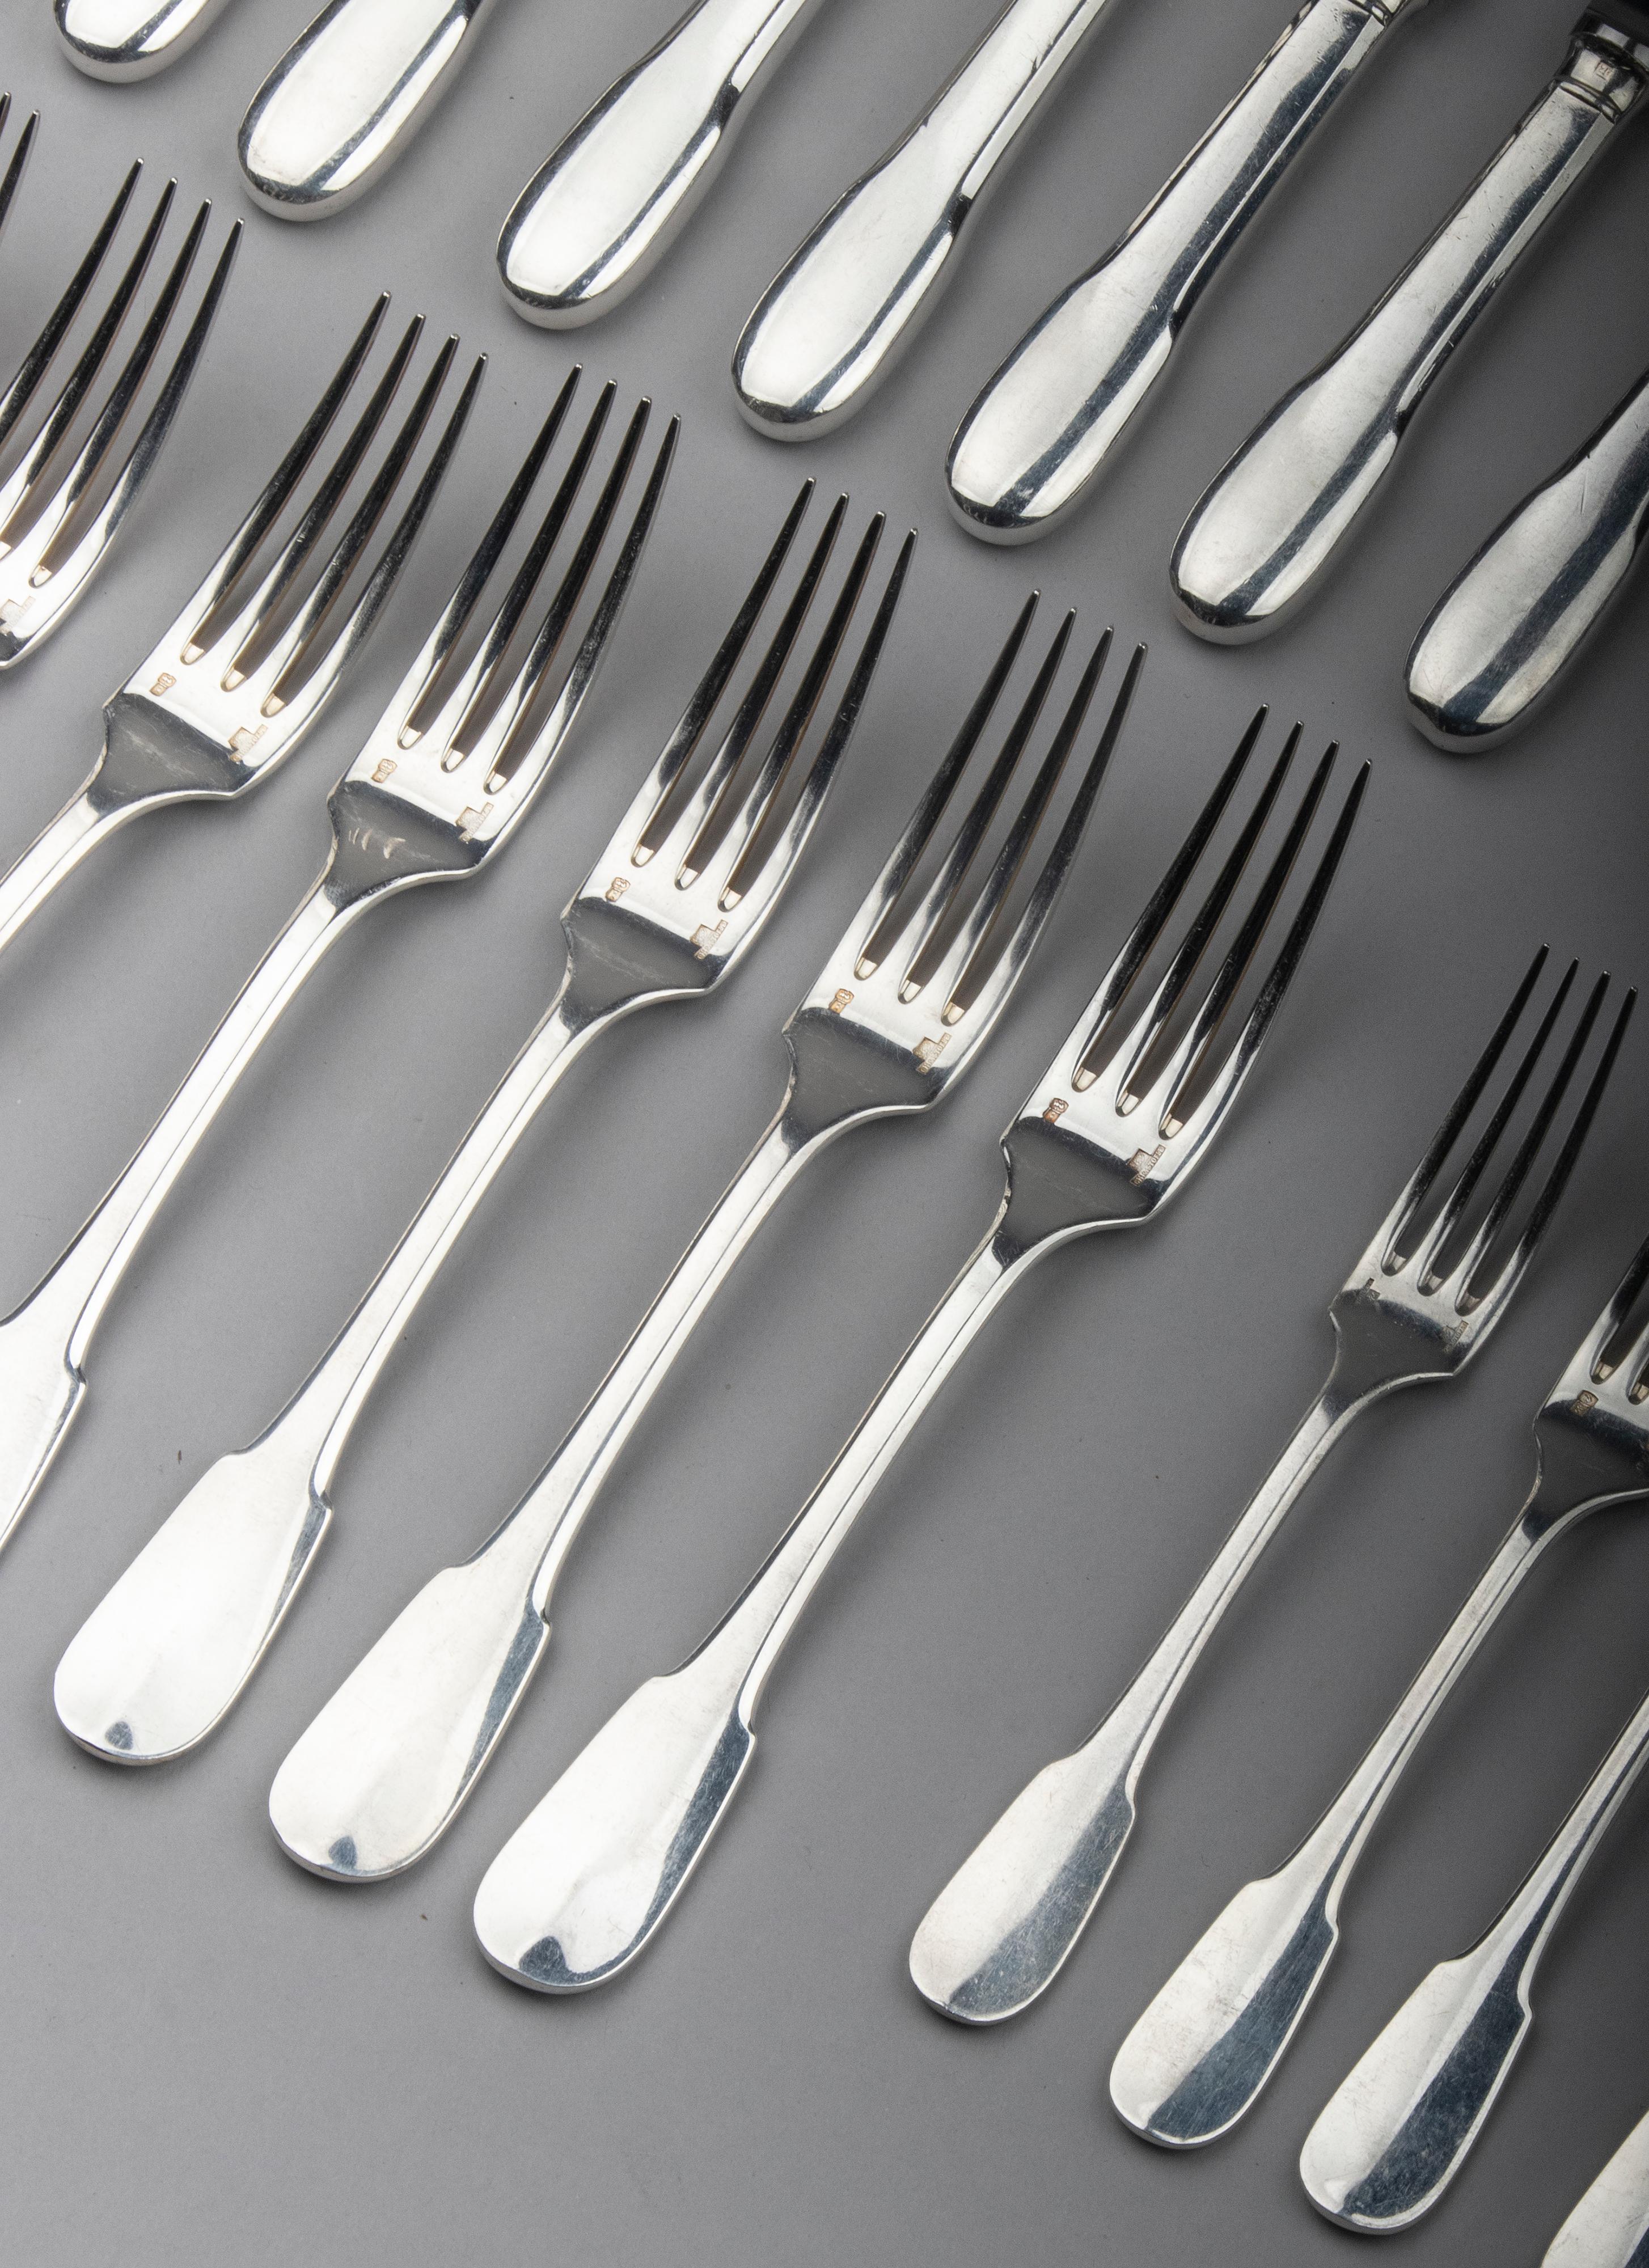 69-Piece Silver-Plated Flatware by Christofle, Cluny, for 9 Persons 10